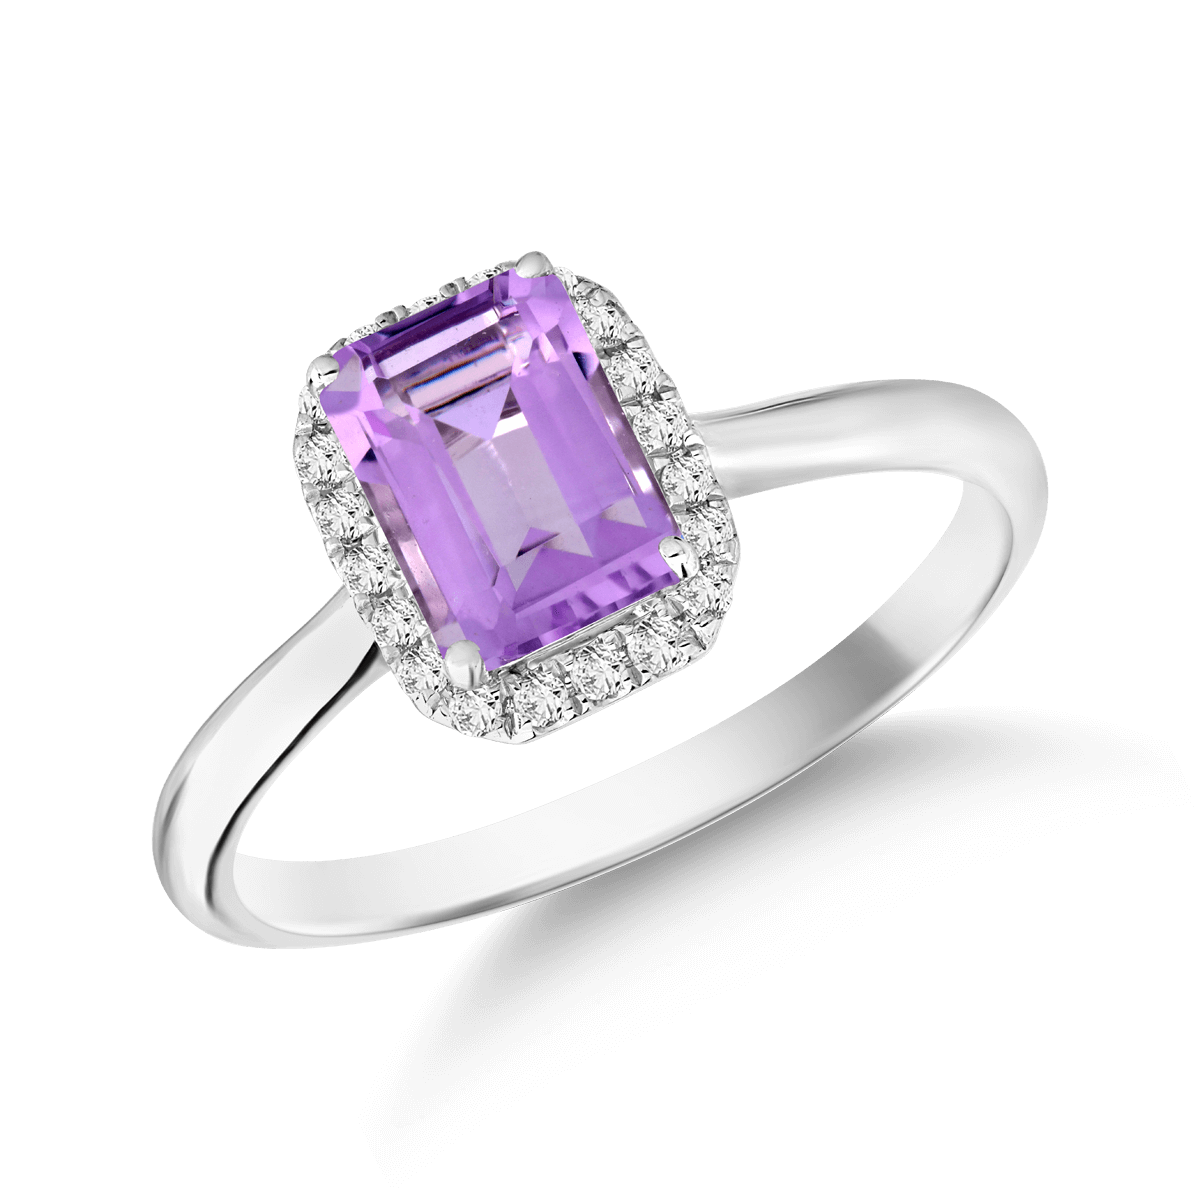 18K white gold ring with 0.84ct amethyst and 0.1ct diamonds